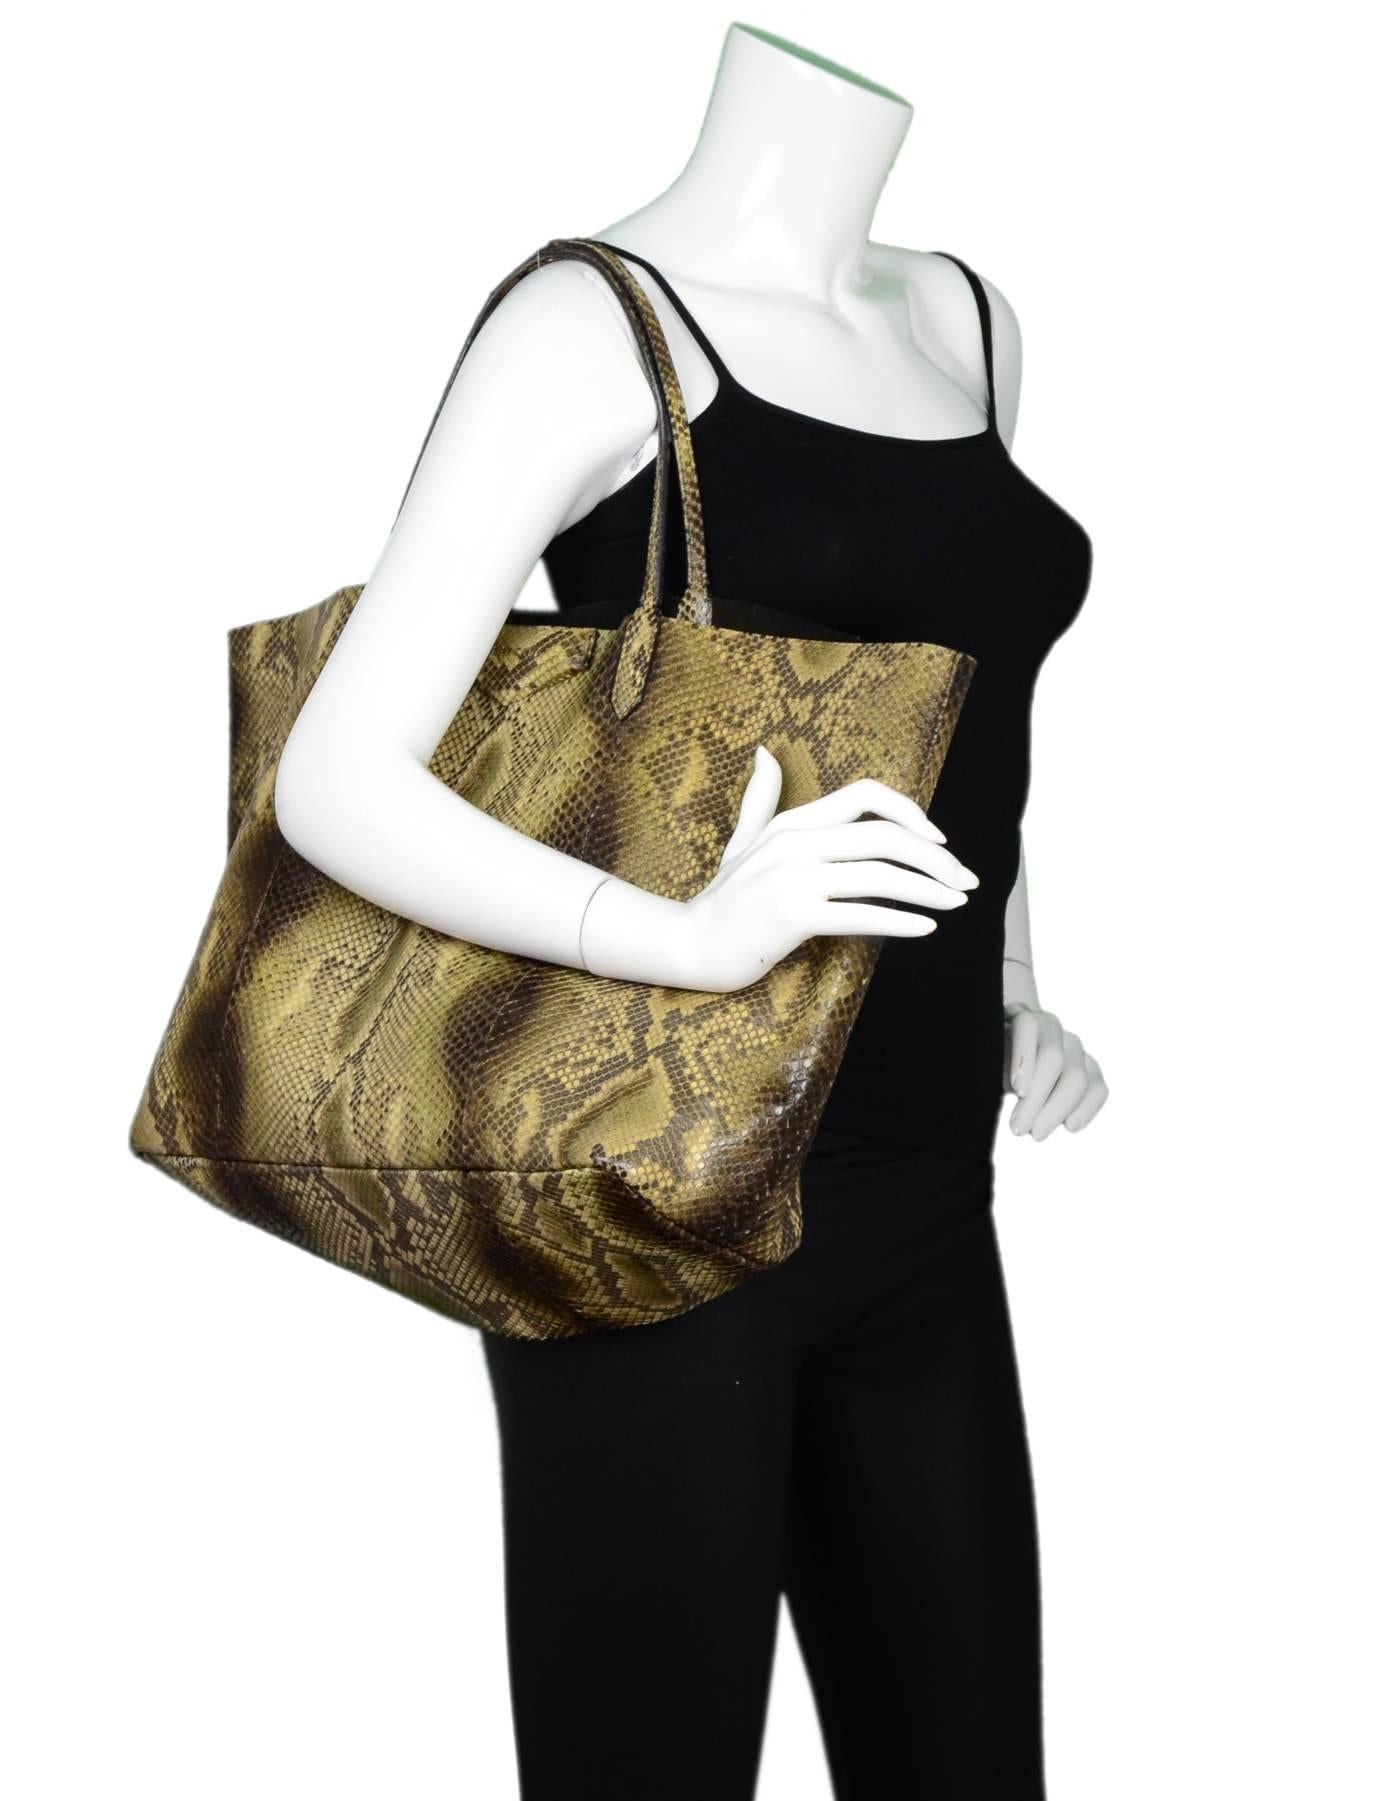 Givenchy Tan Python Antigona Tote

Made In: Italy
Color: Tan
Hardware: Goldtone
Materials: Python
Lining: Brown suede
Closure/Opening: Open top
Exterior Pockets: None
Interior Pockets: Zip insert
Overall Condition: Very good pre-owned